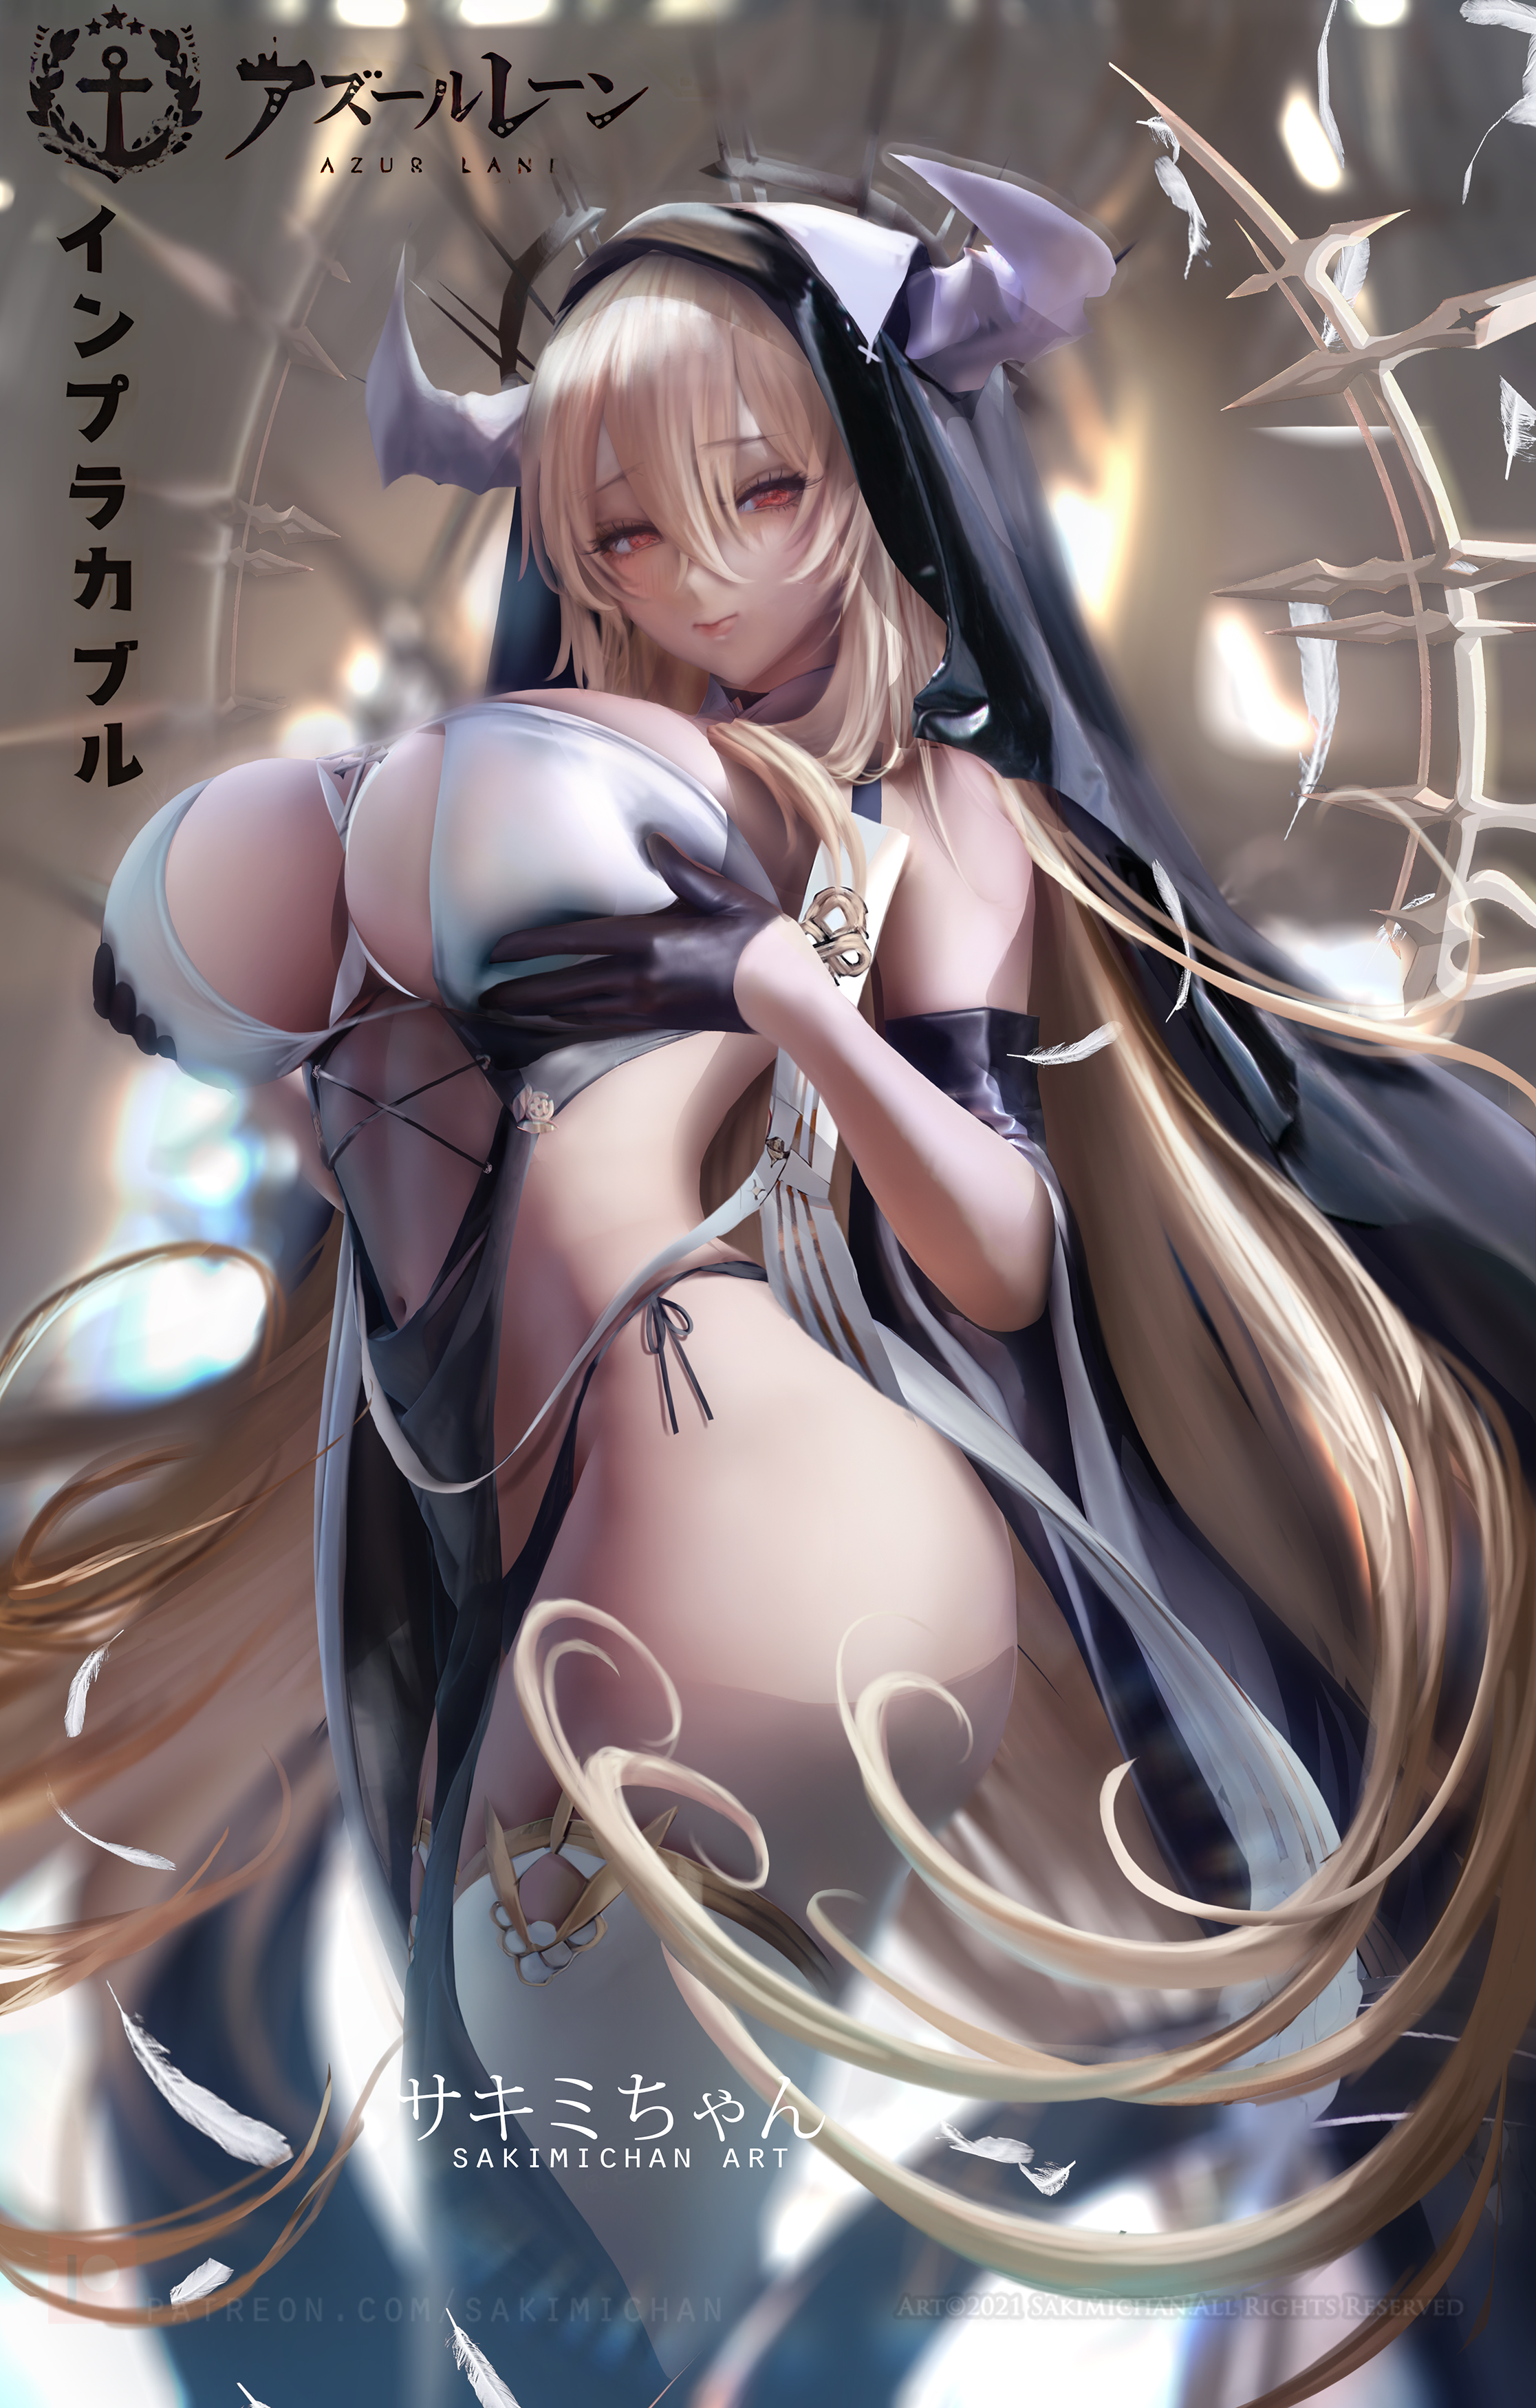 Anime 2233x3500 Implacable(Azur Lane) Azur Lane video games anime anime girls video game girls 2D artwork drawing fan art Sakimichan portrait display gloves looking at viewer long hair Japanese boobs hands on boobs horns feathers nuns nun outfit huge breasts